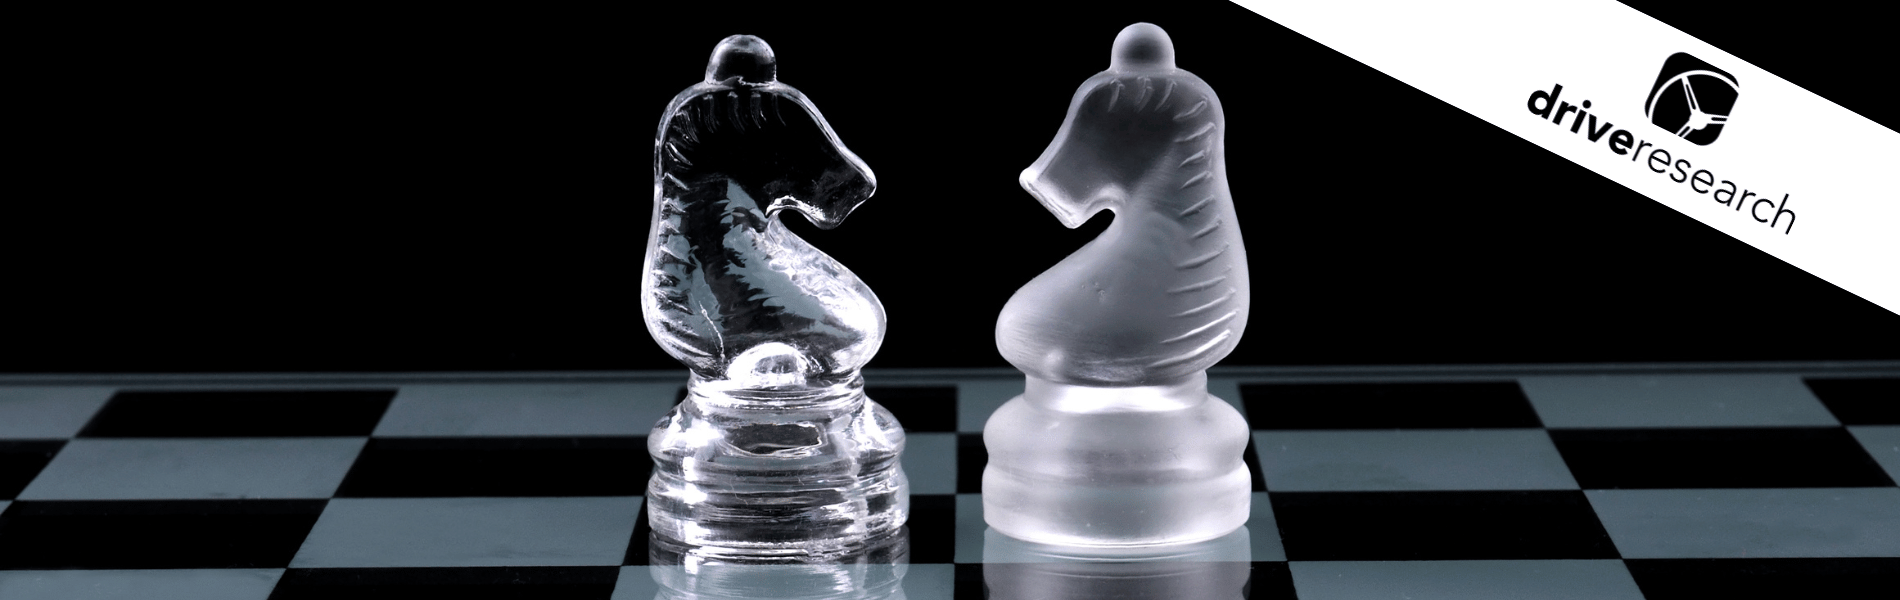 two chess pieces symbolizing competition